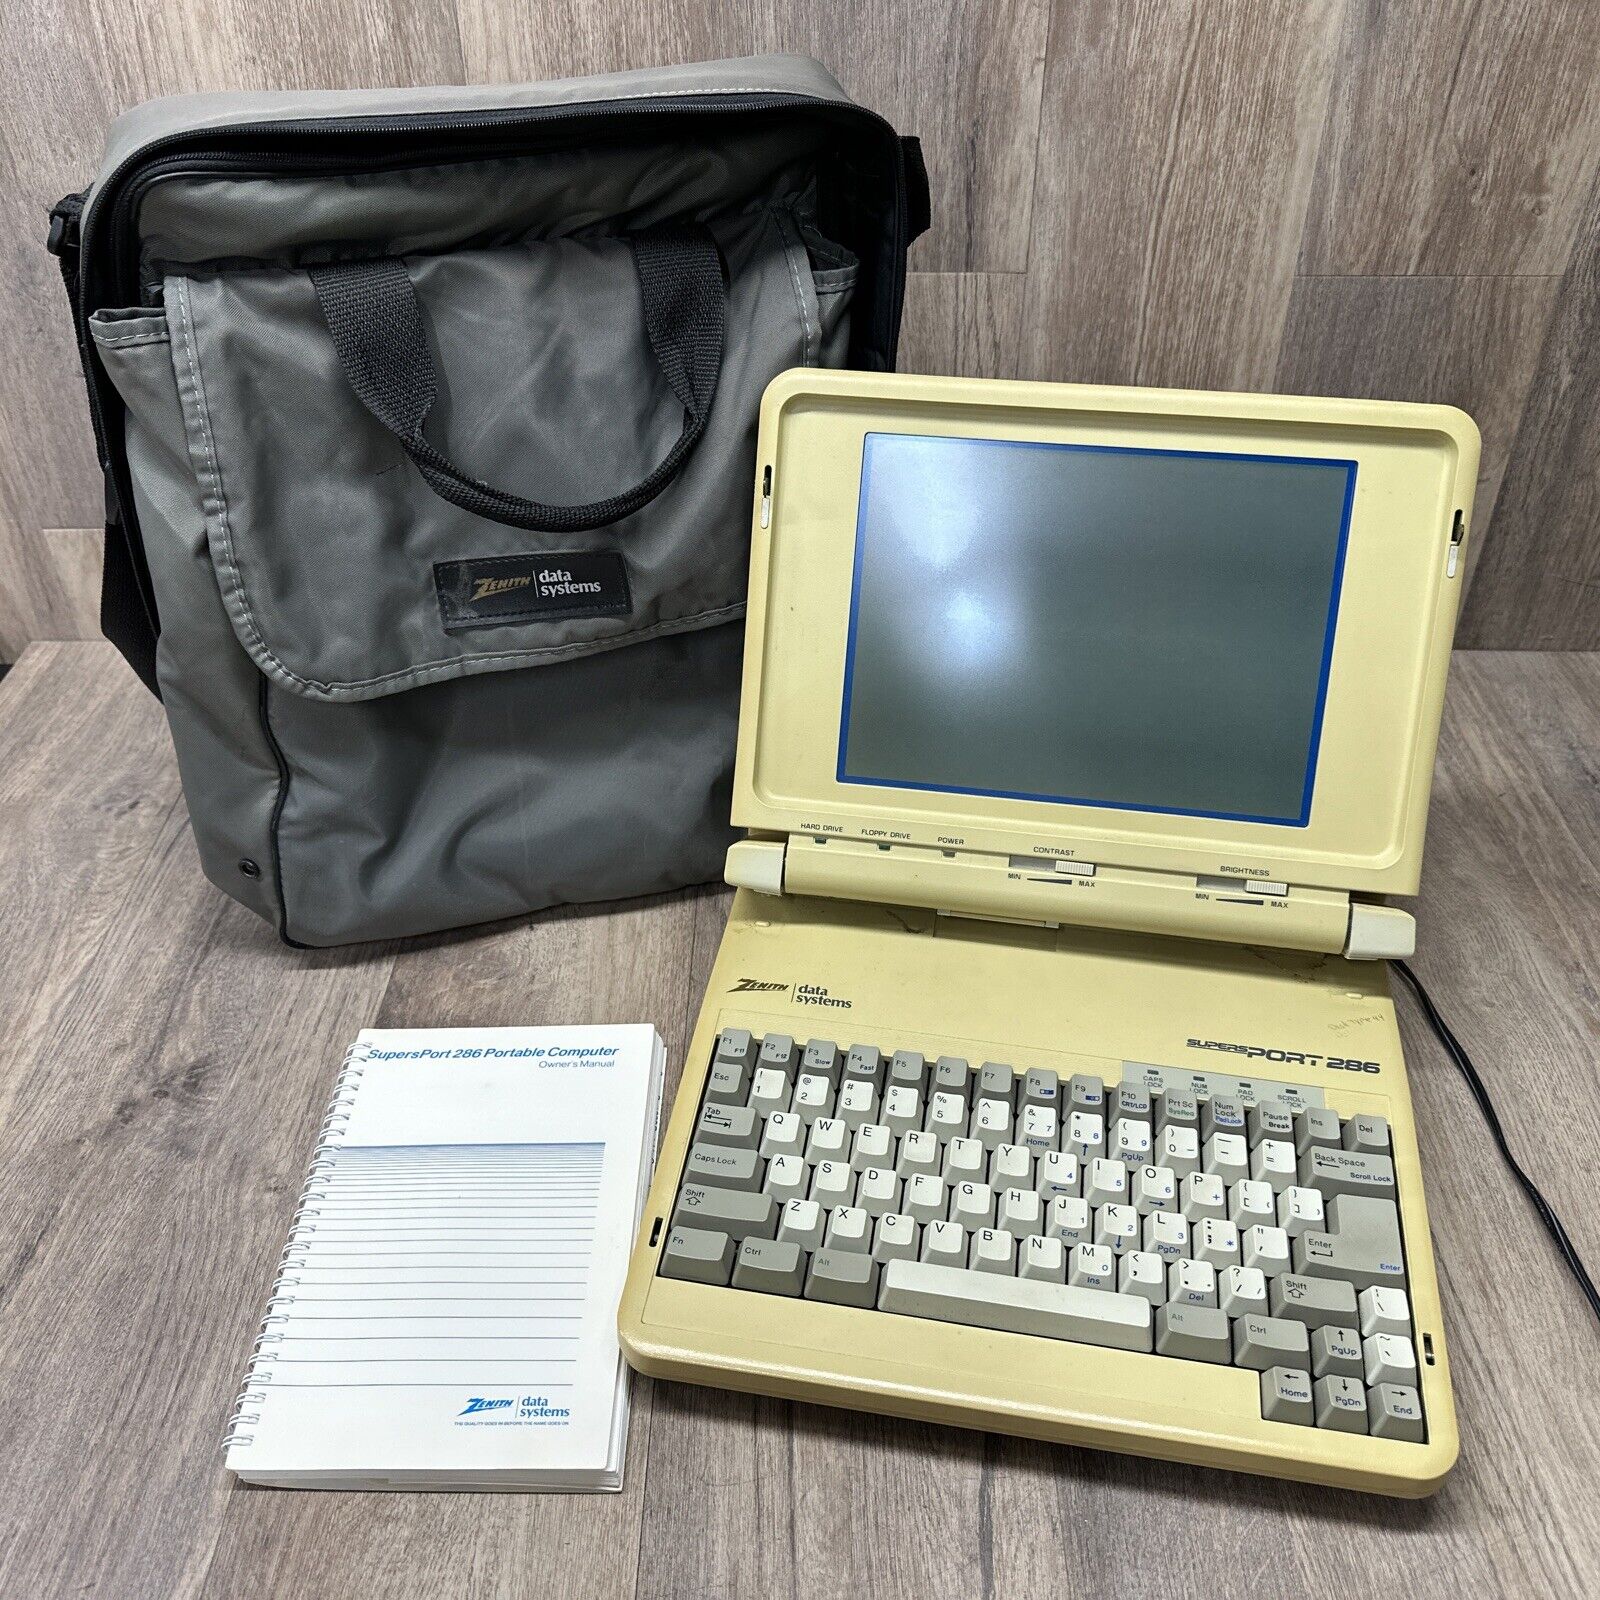 Vintage Zenith Data Systems SUPERSPORT 286 Computer With Power Supply (READ)